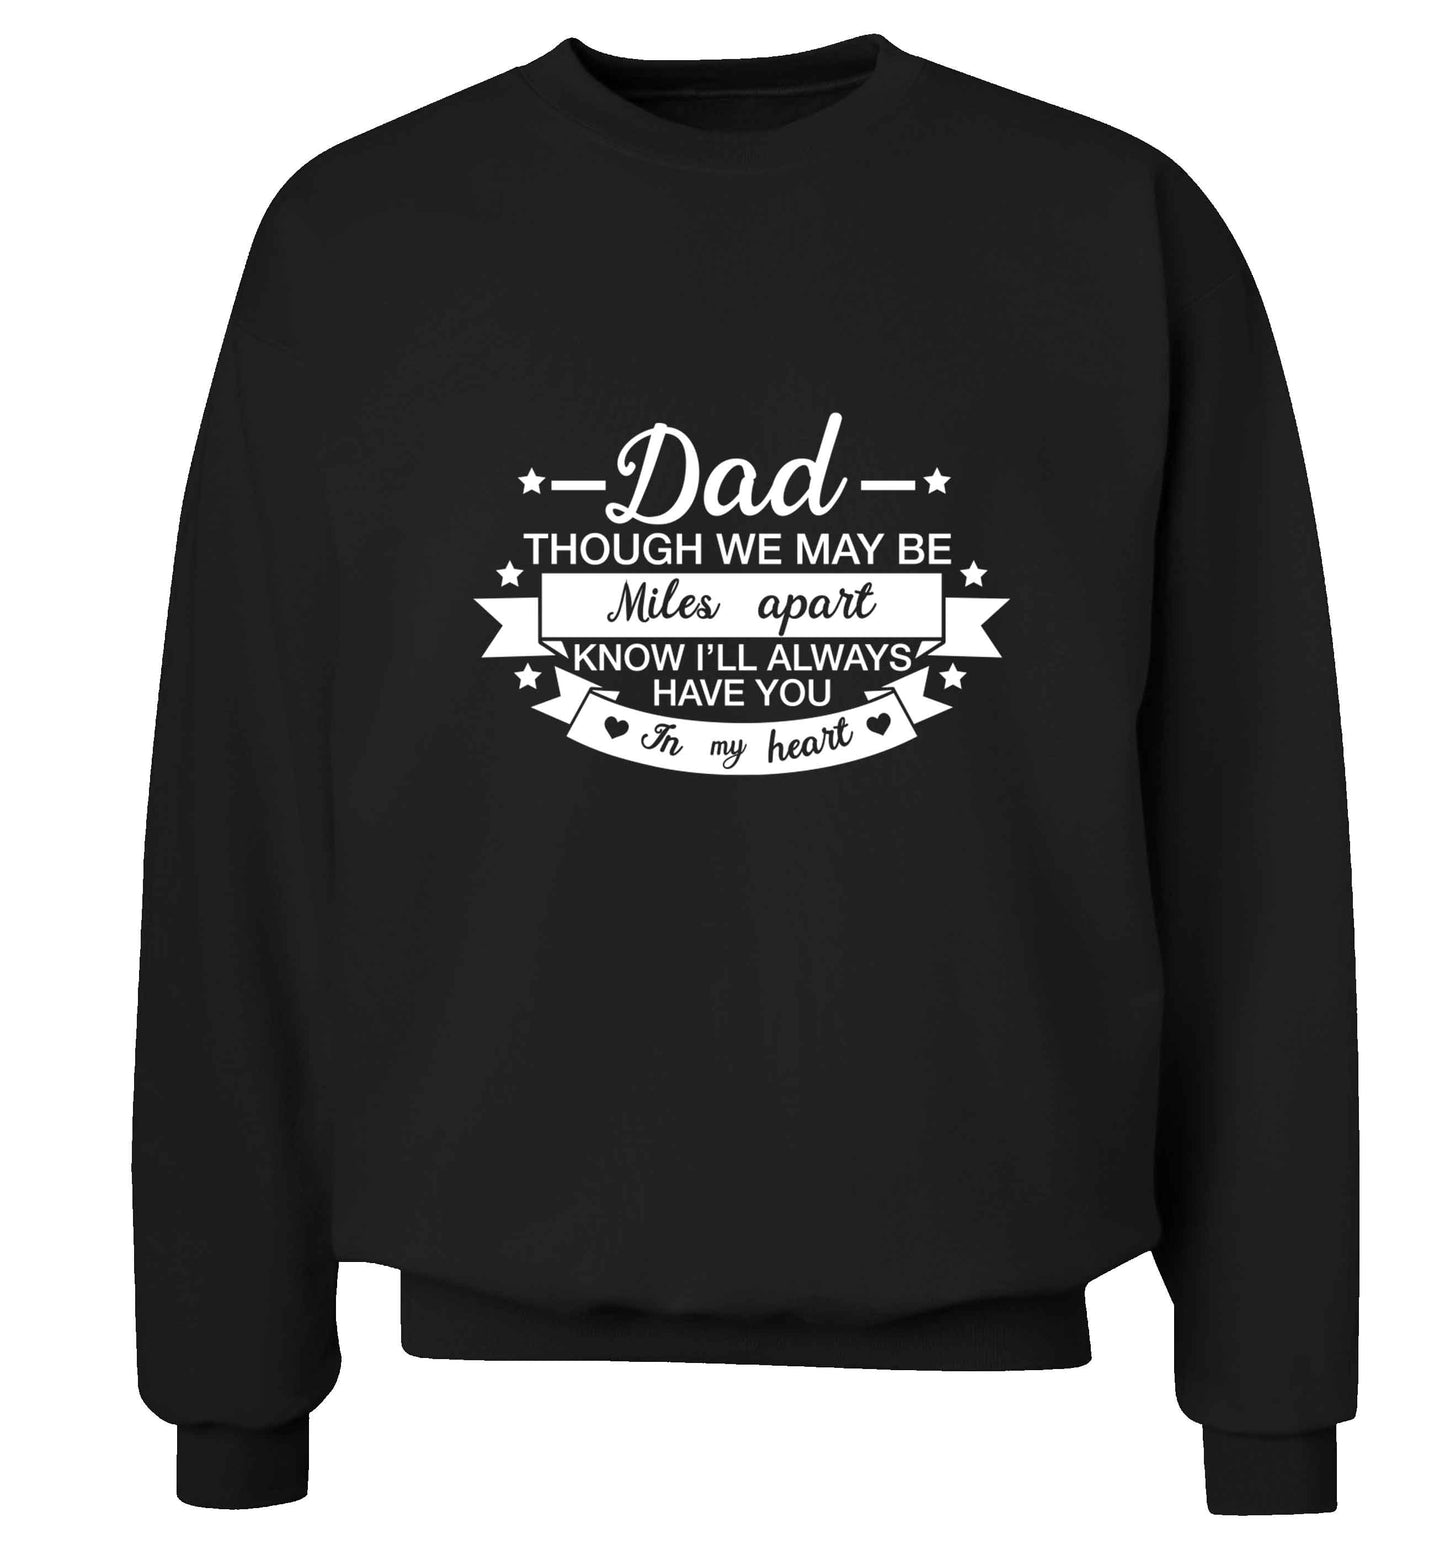 Dad though we are miles apart know I'll always have you in my heart adult's unisex black sweater 2XL